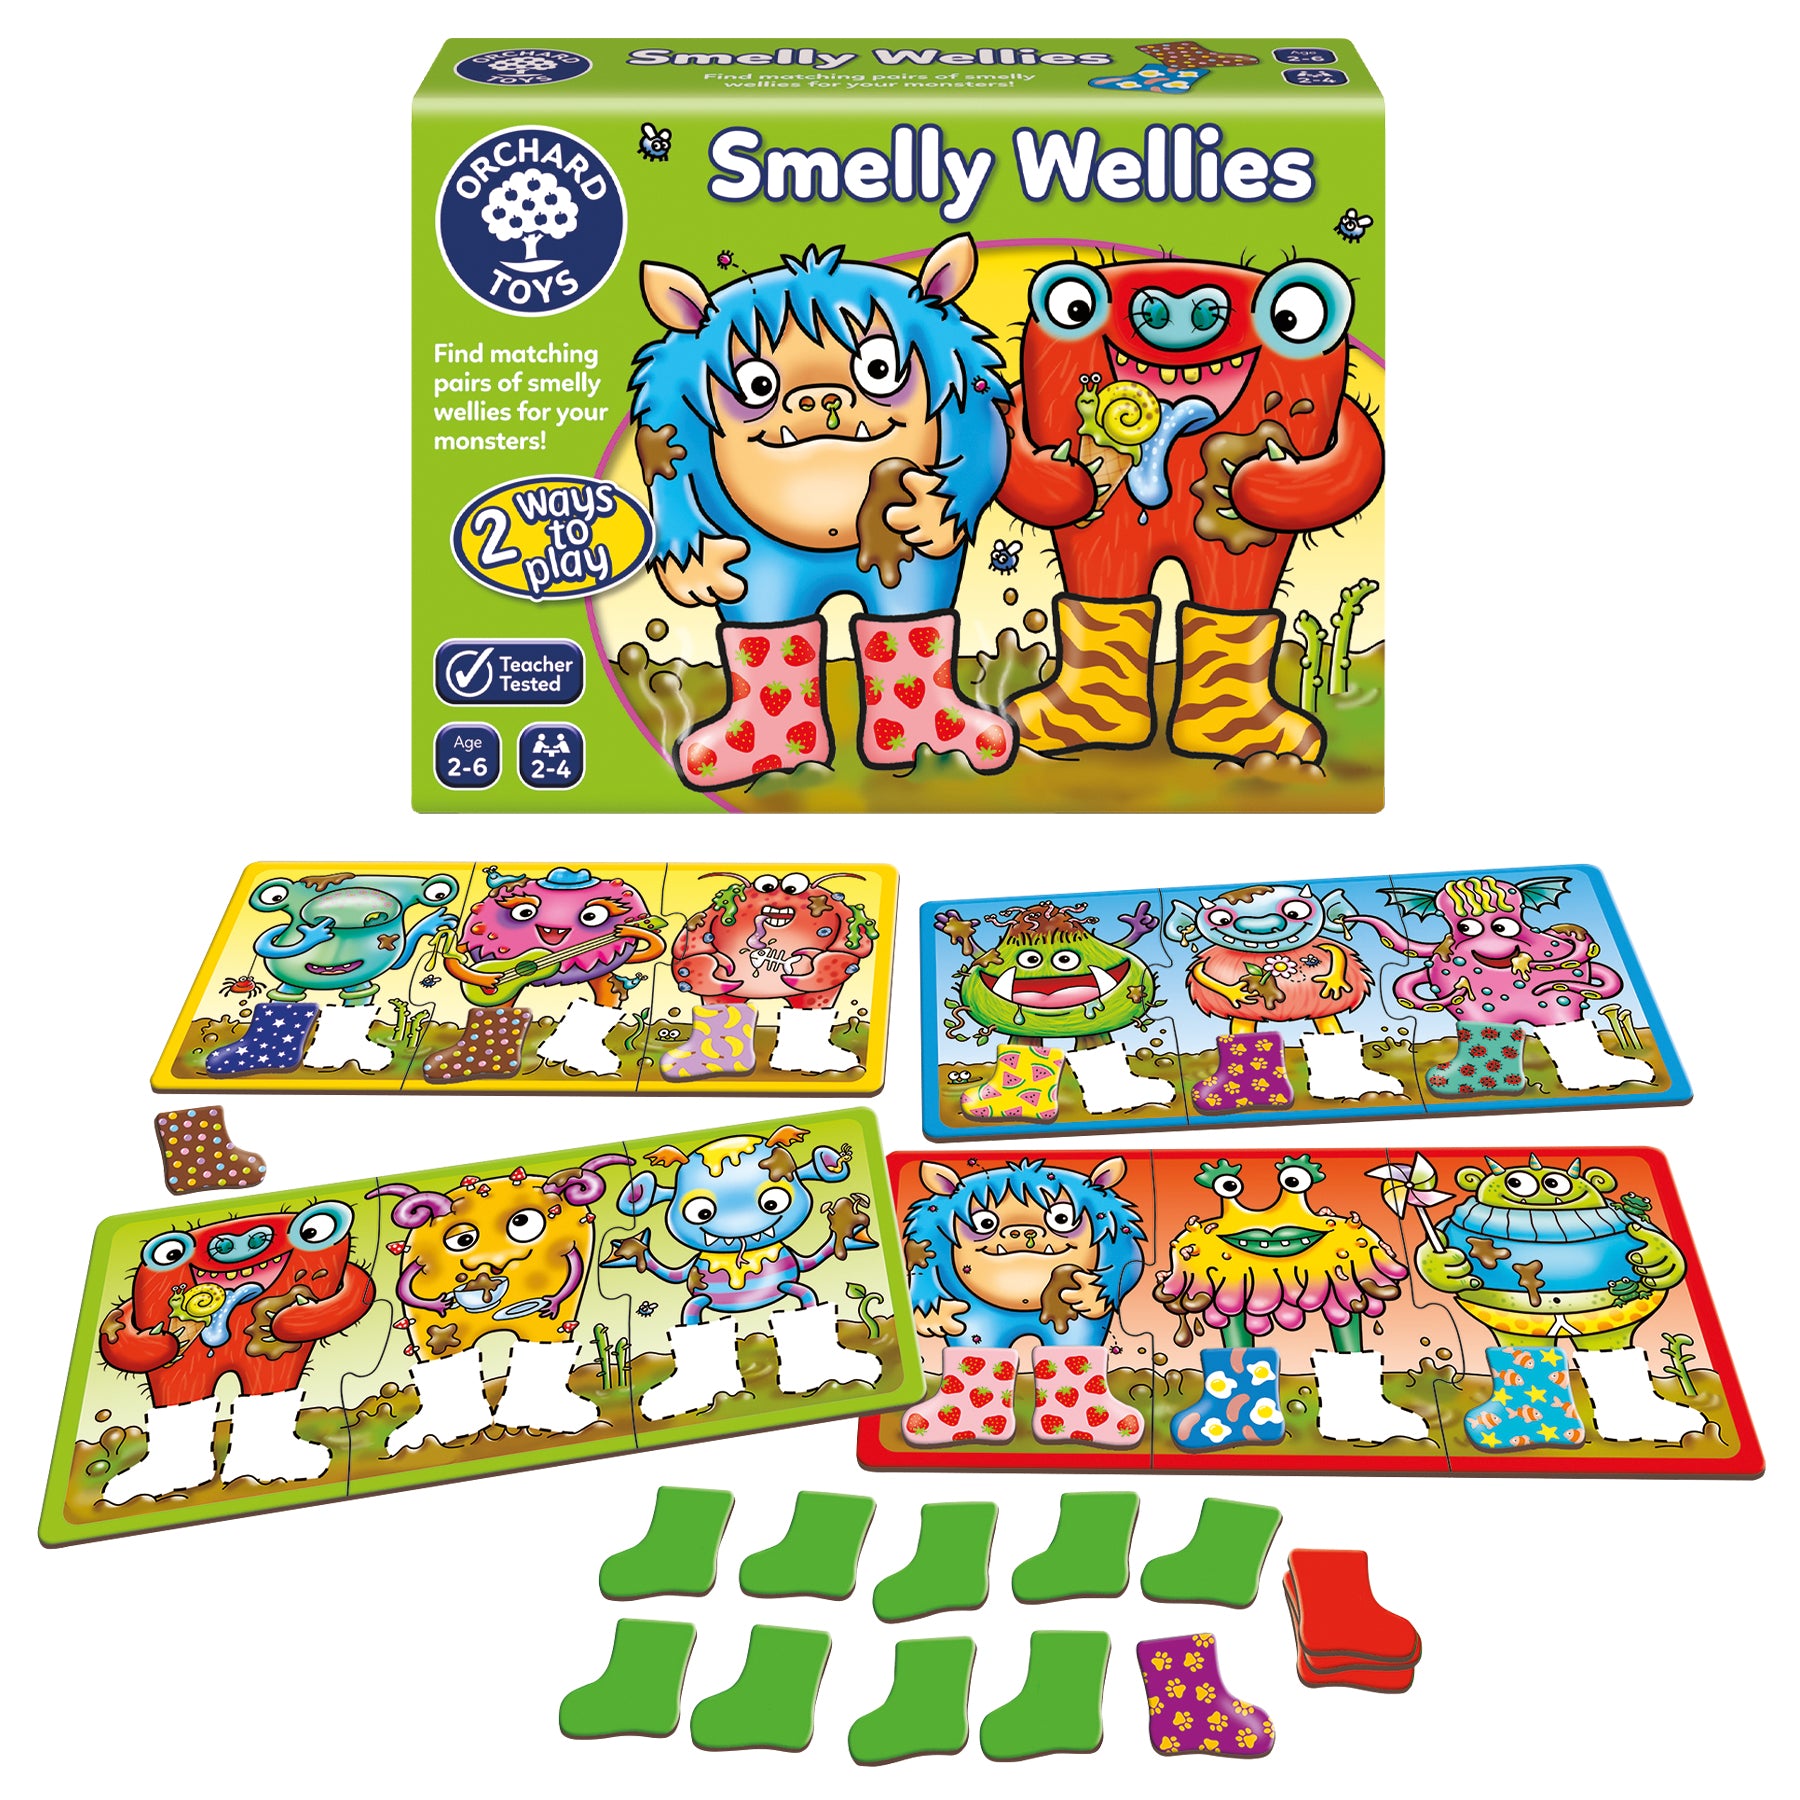 SMELLY WELLIES